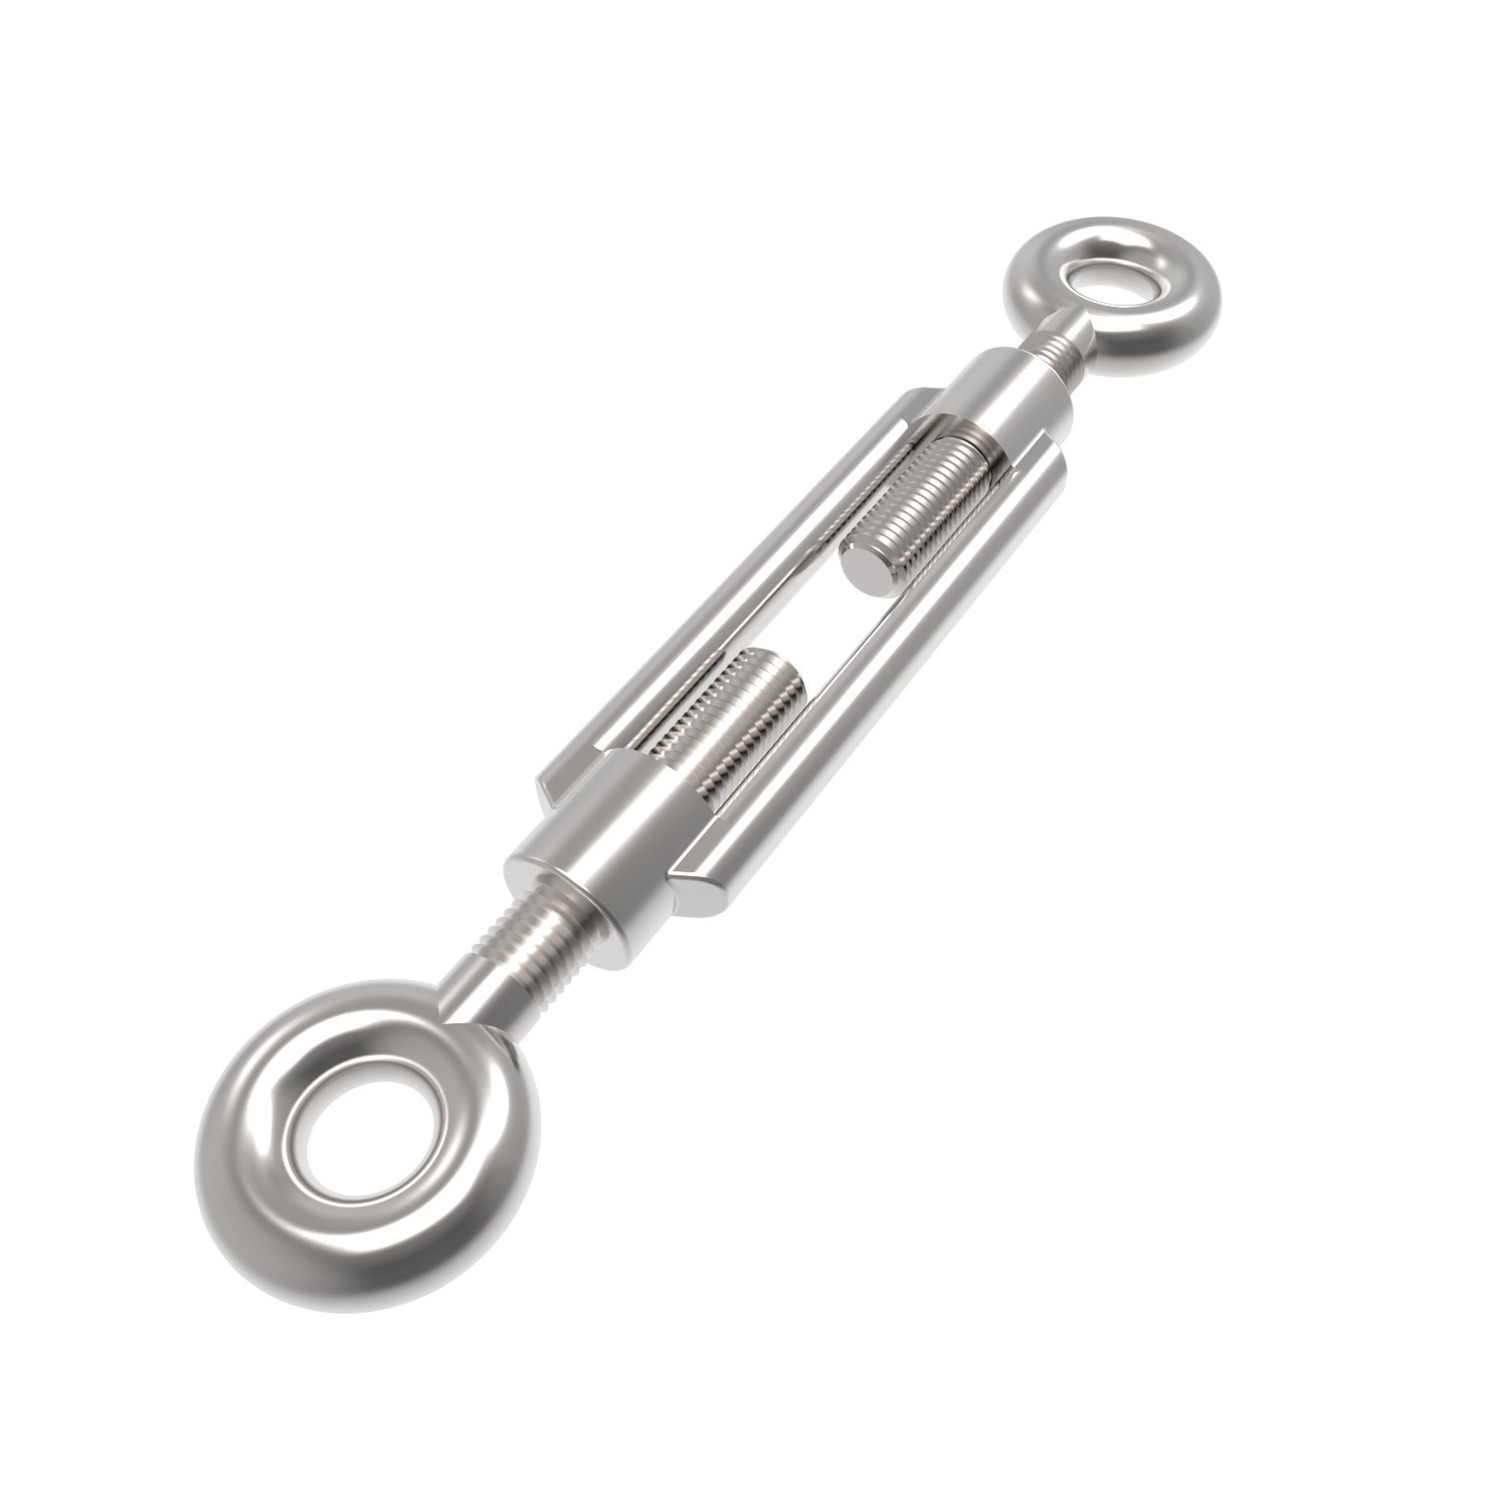 R3840.030-ZP Eye End Turnbuckles M30 steel Not to be used for lifting unless SWL marked.